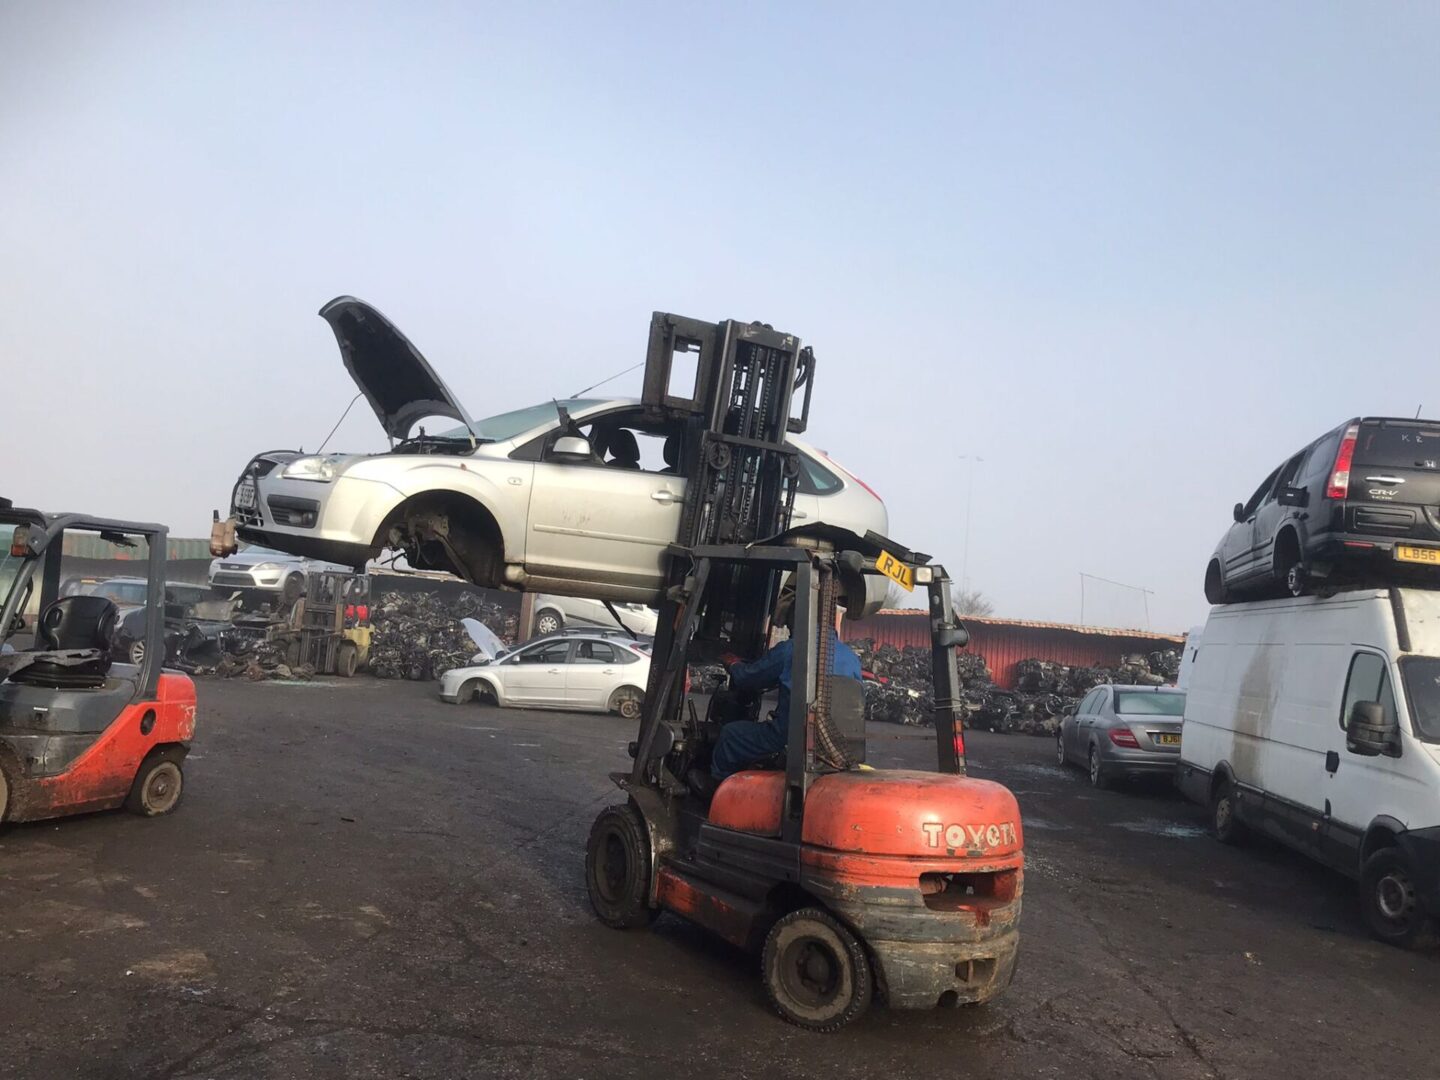 A forklift is lifting a car in the air.